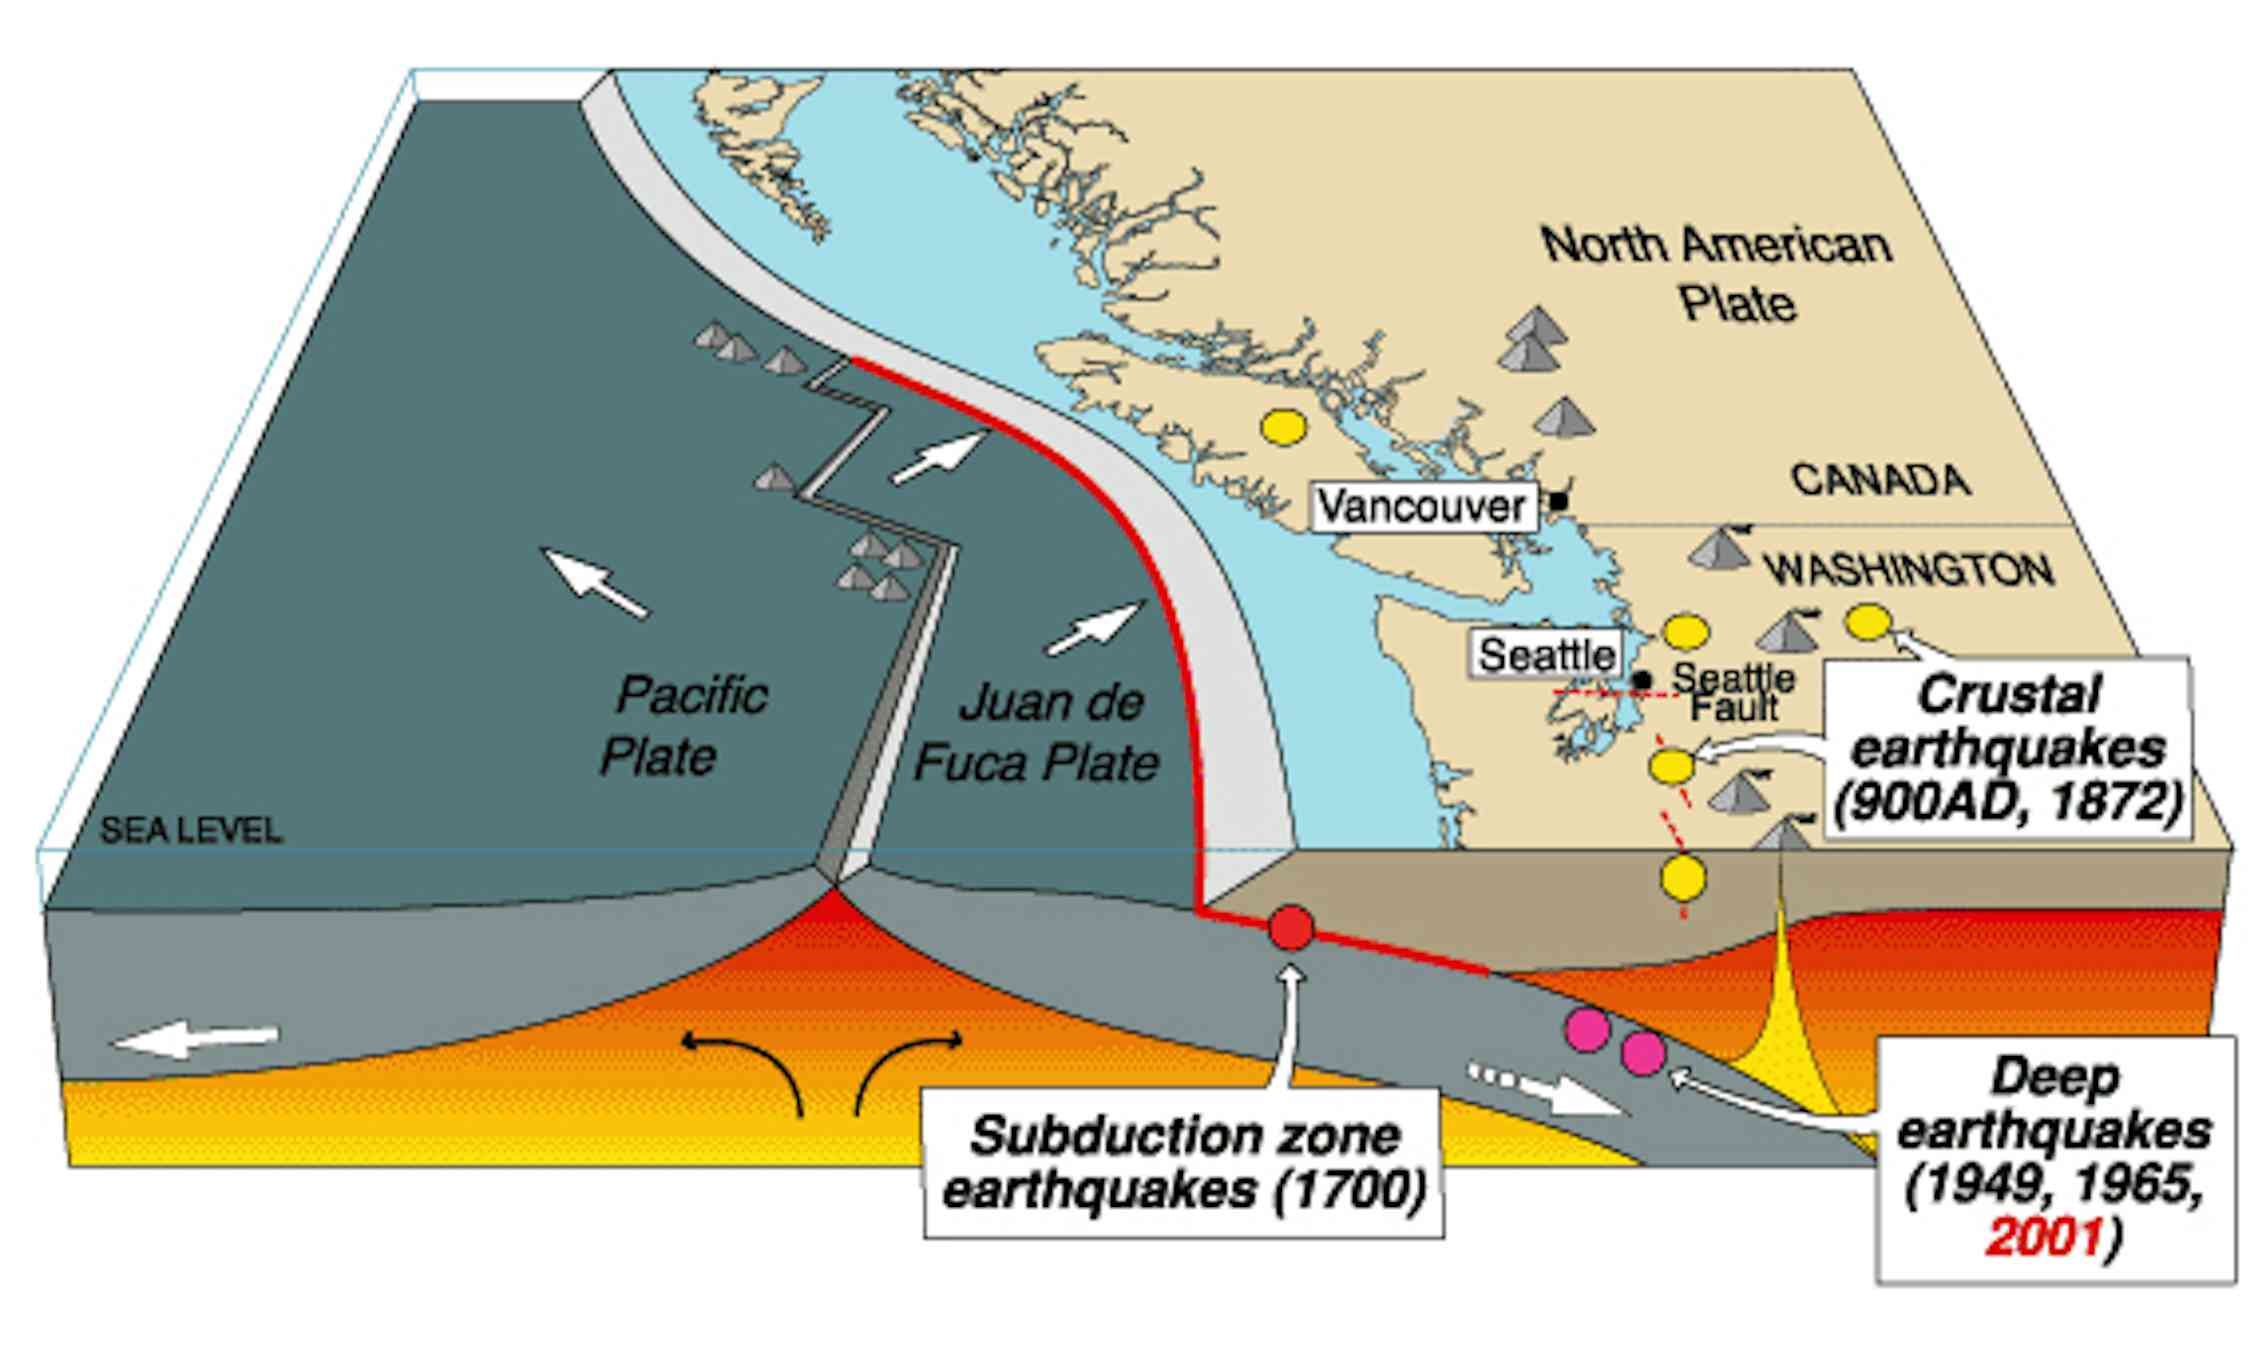 Parts of the Pacific Northwest's Cascadia fault are more seismically